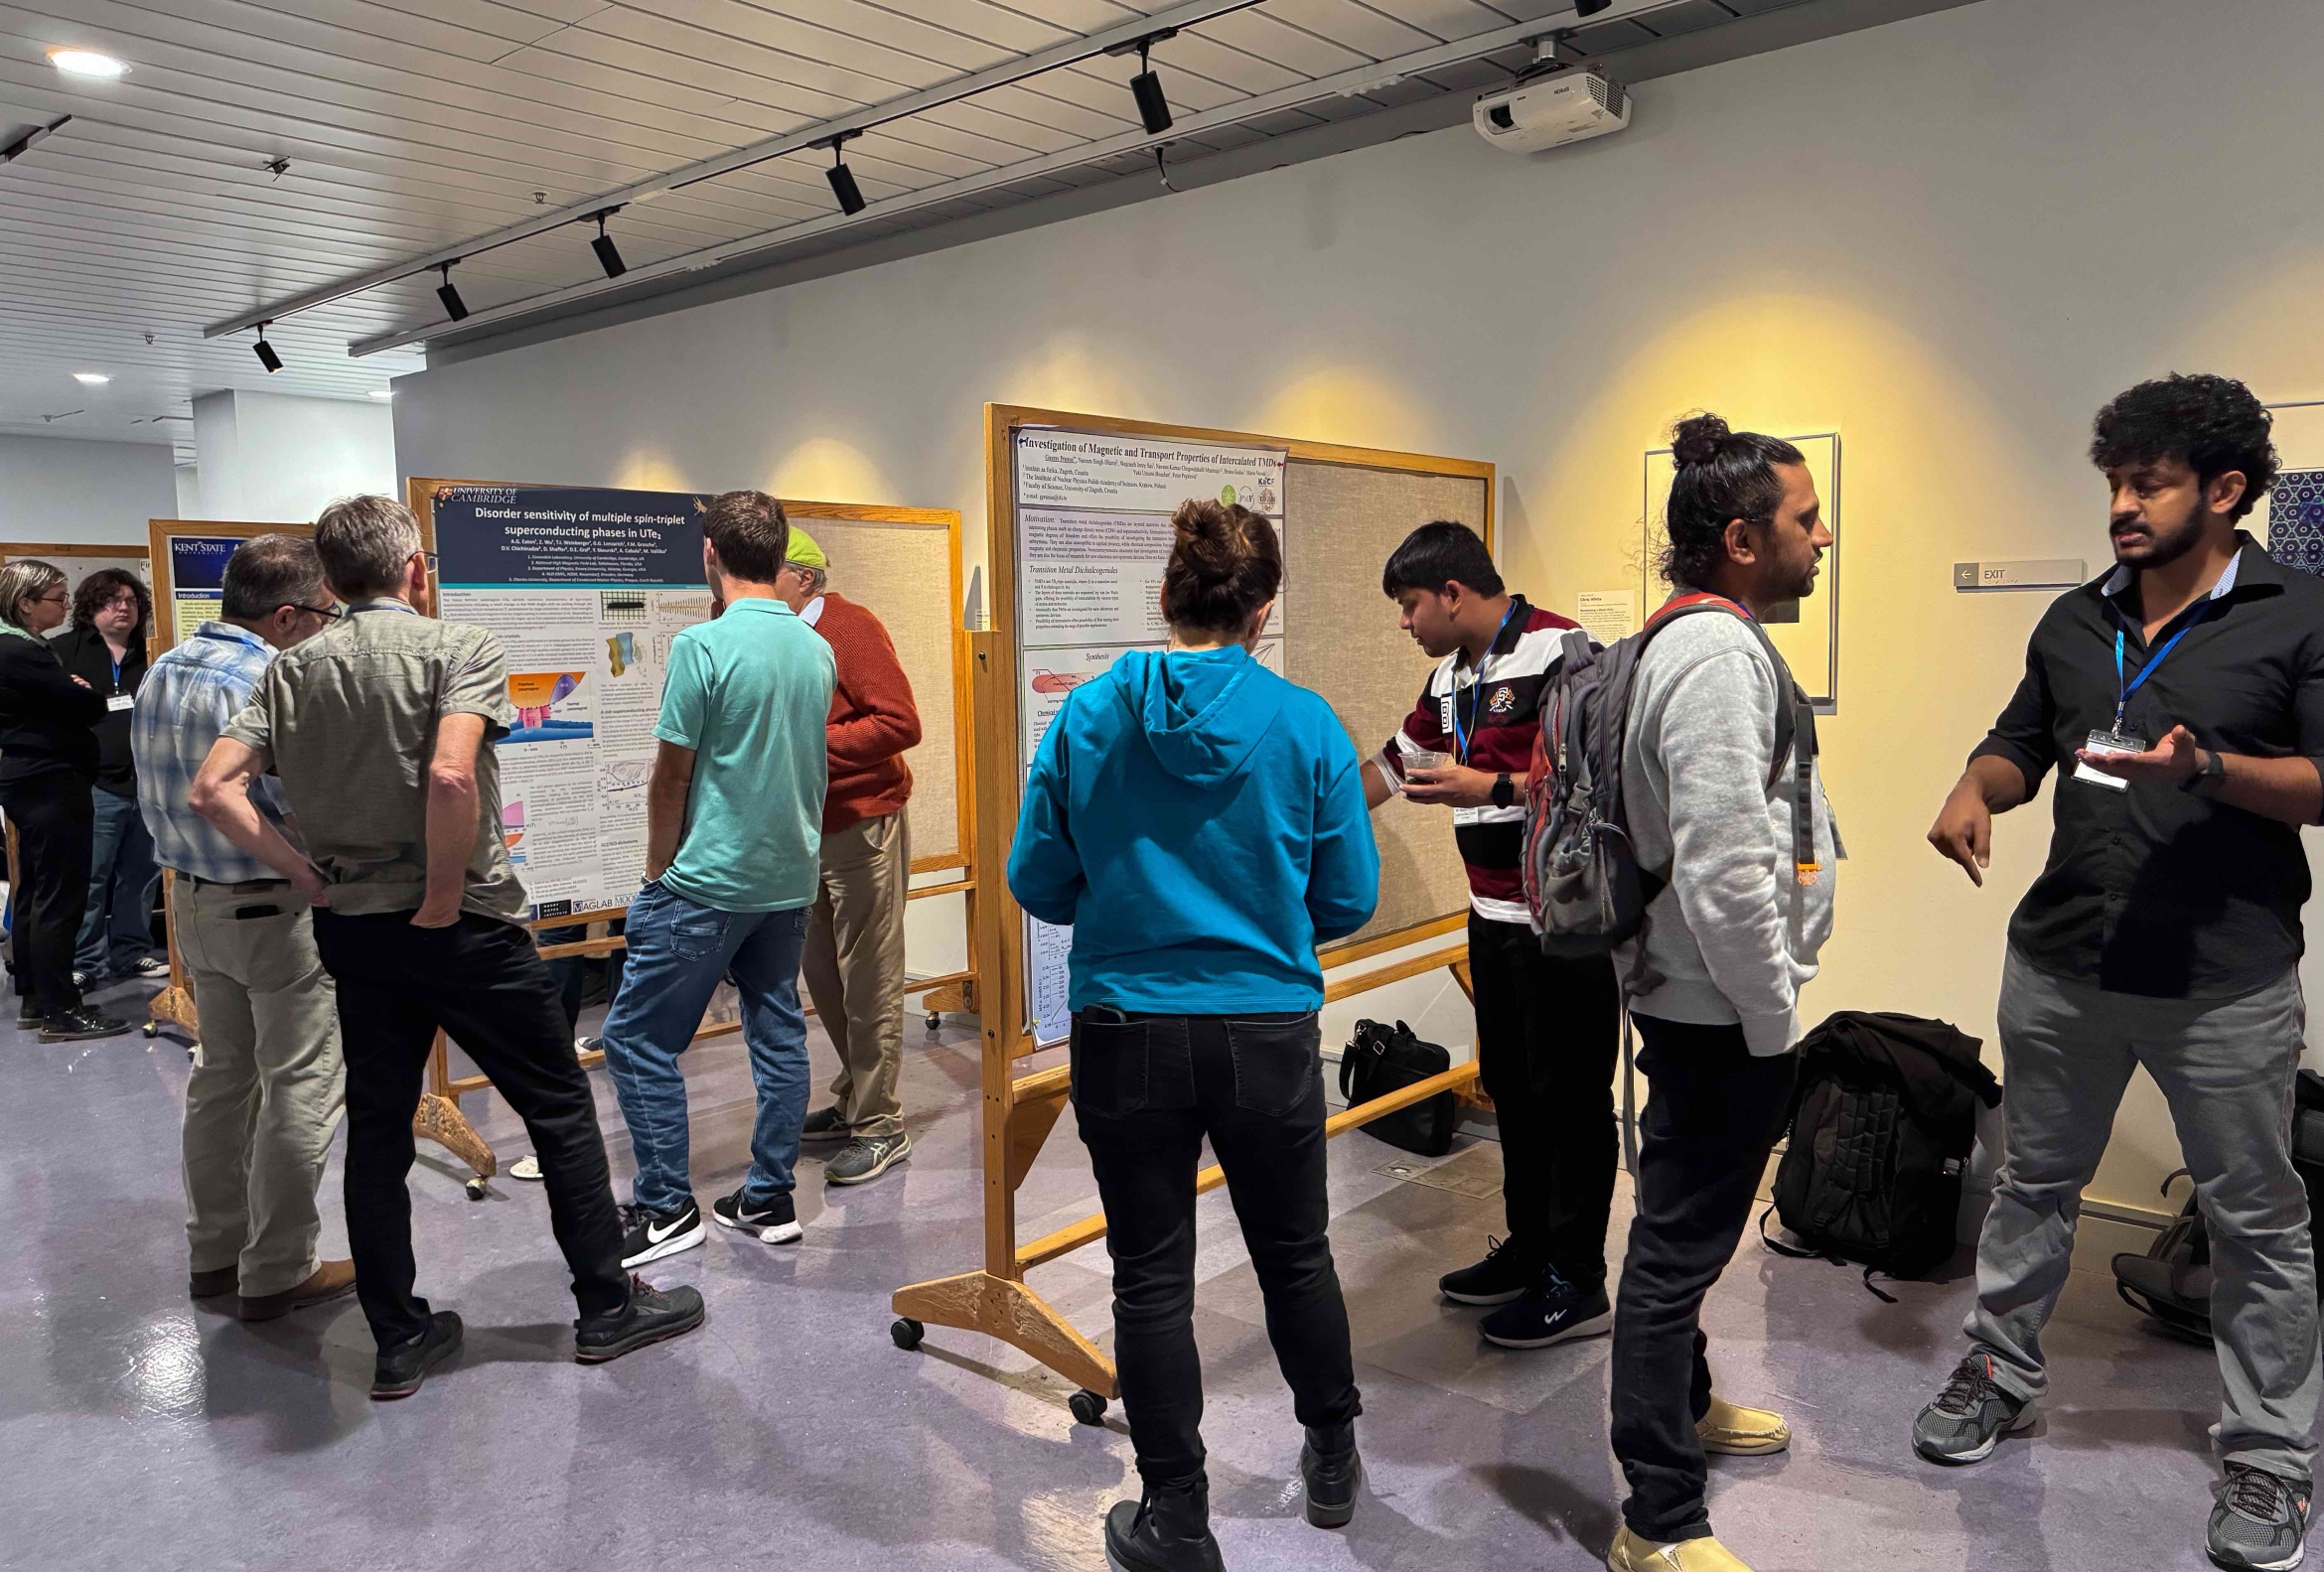 scientists discussing projects at a poster session